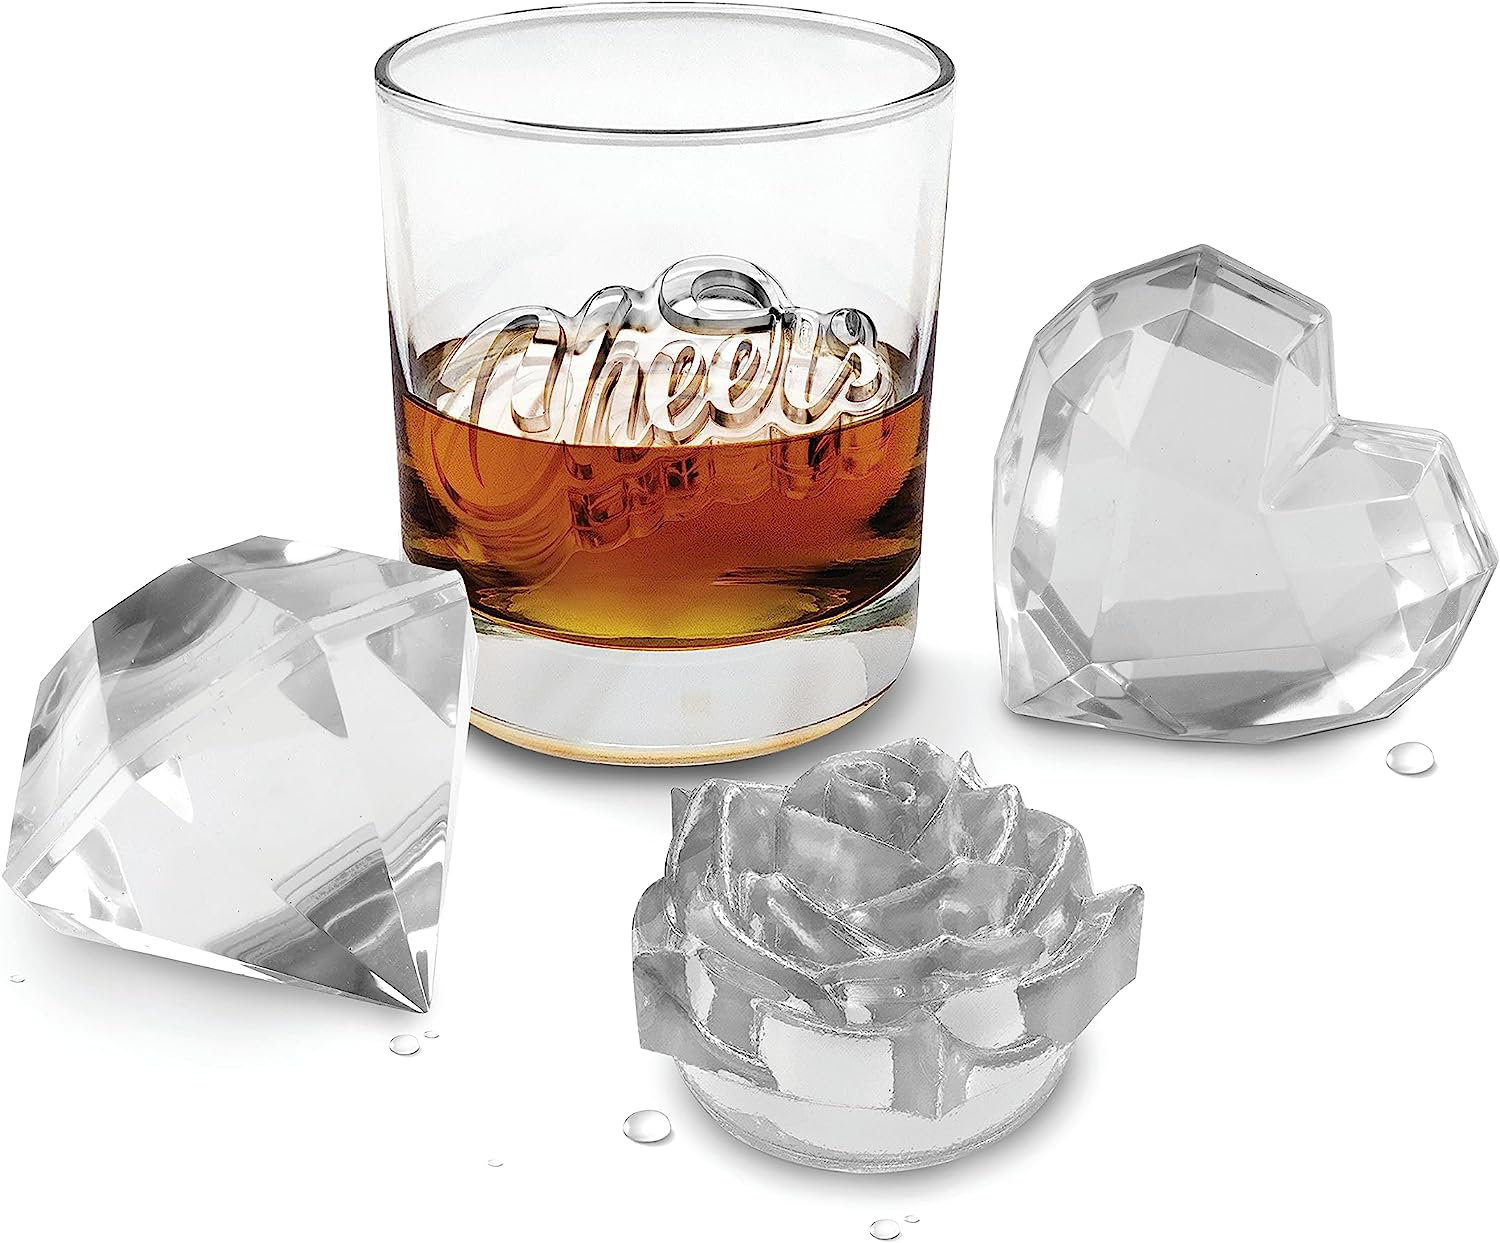 Tovolo Sphere Ice Mold, 2.5 inch - Set of 2 Open Box